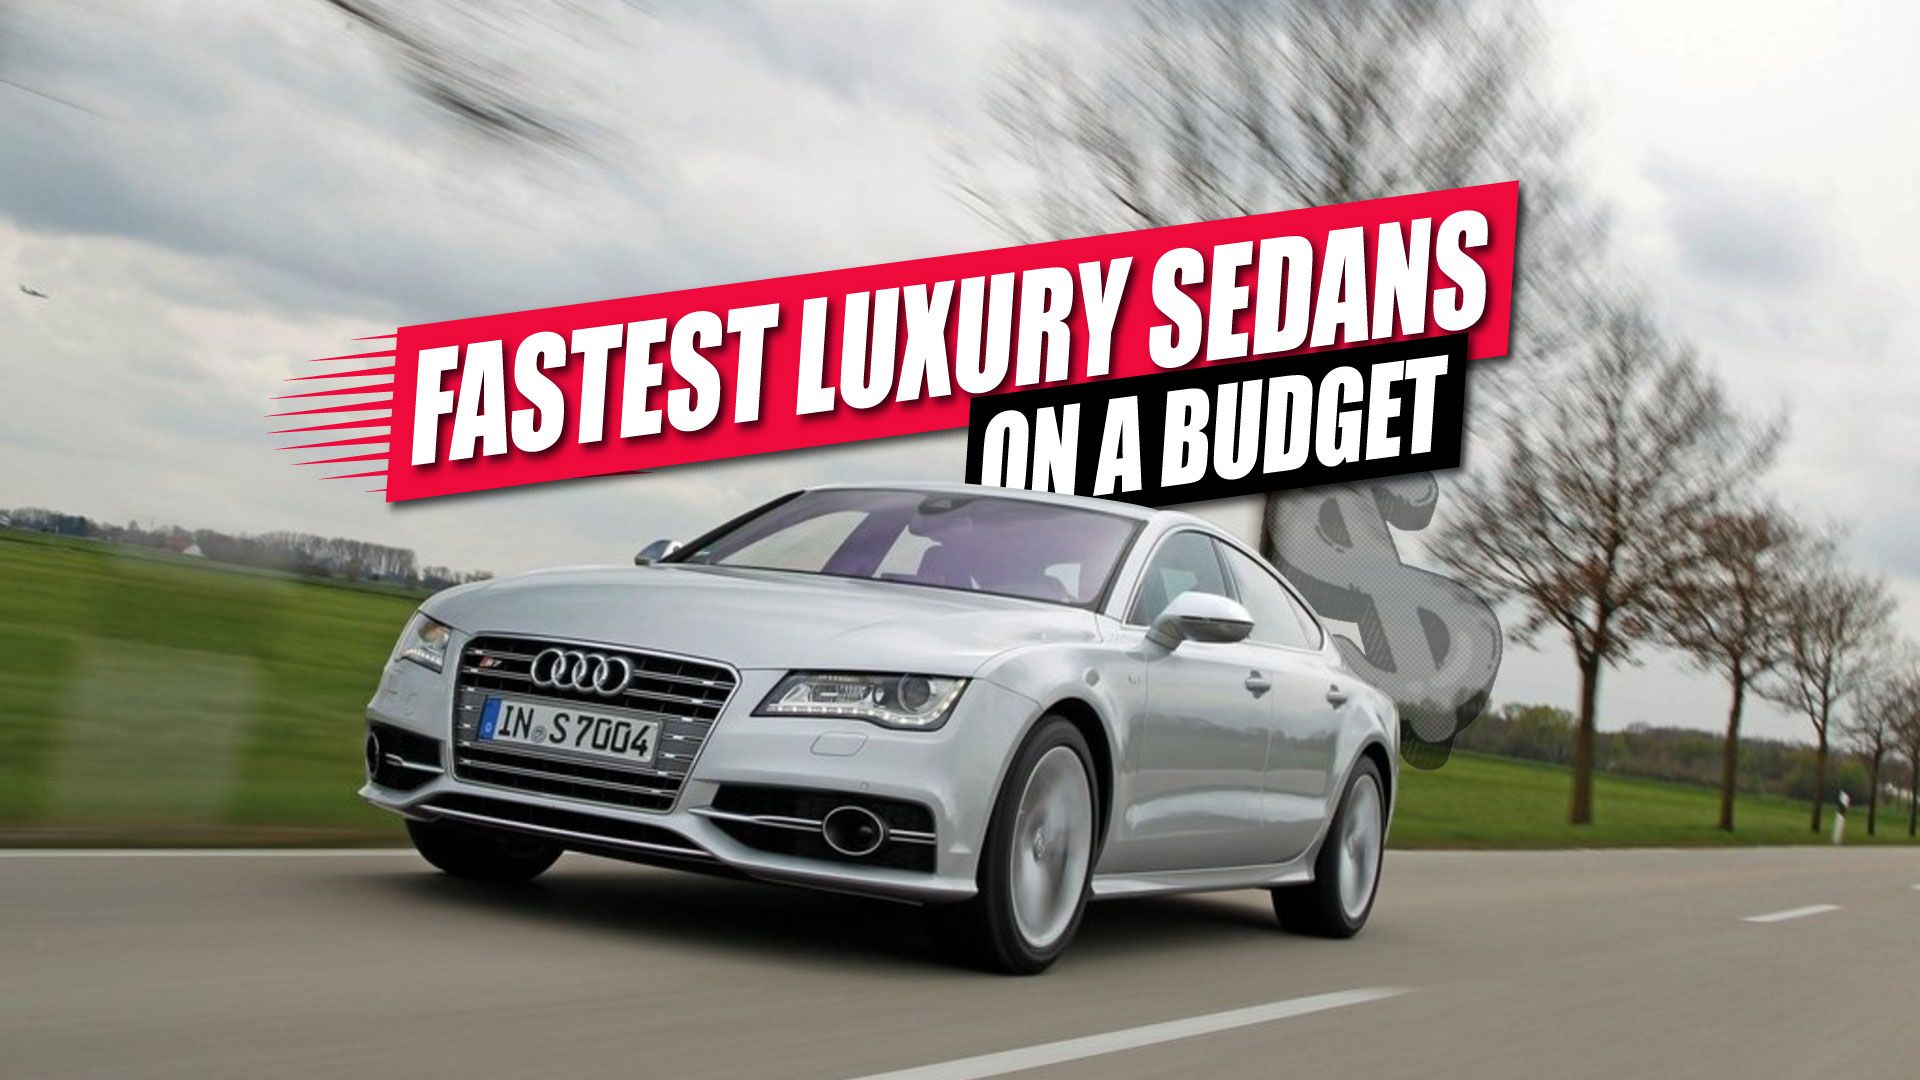 These 10 Fast Luxury Sedans Can Be Yours For Under $20,000